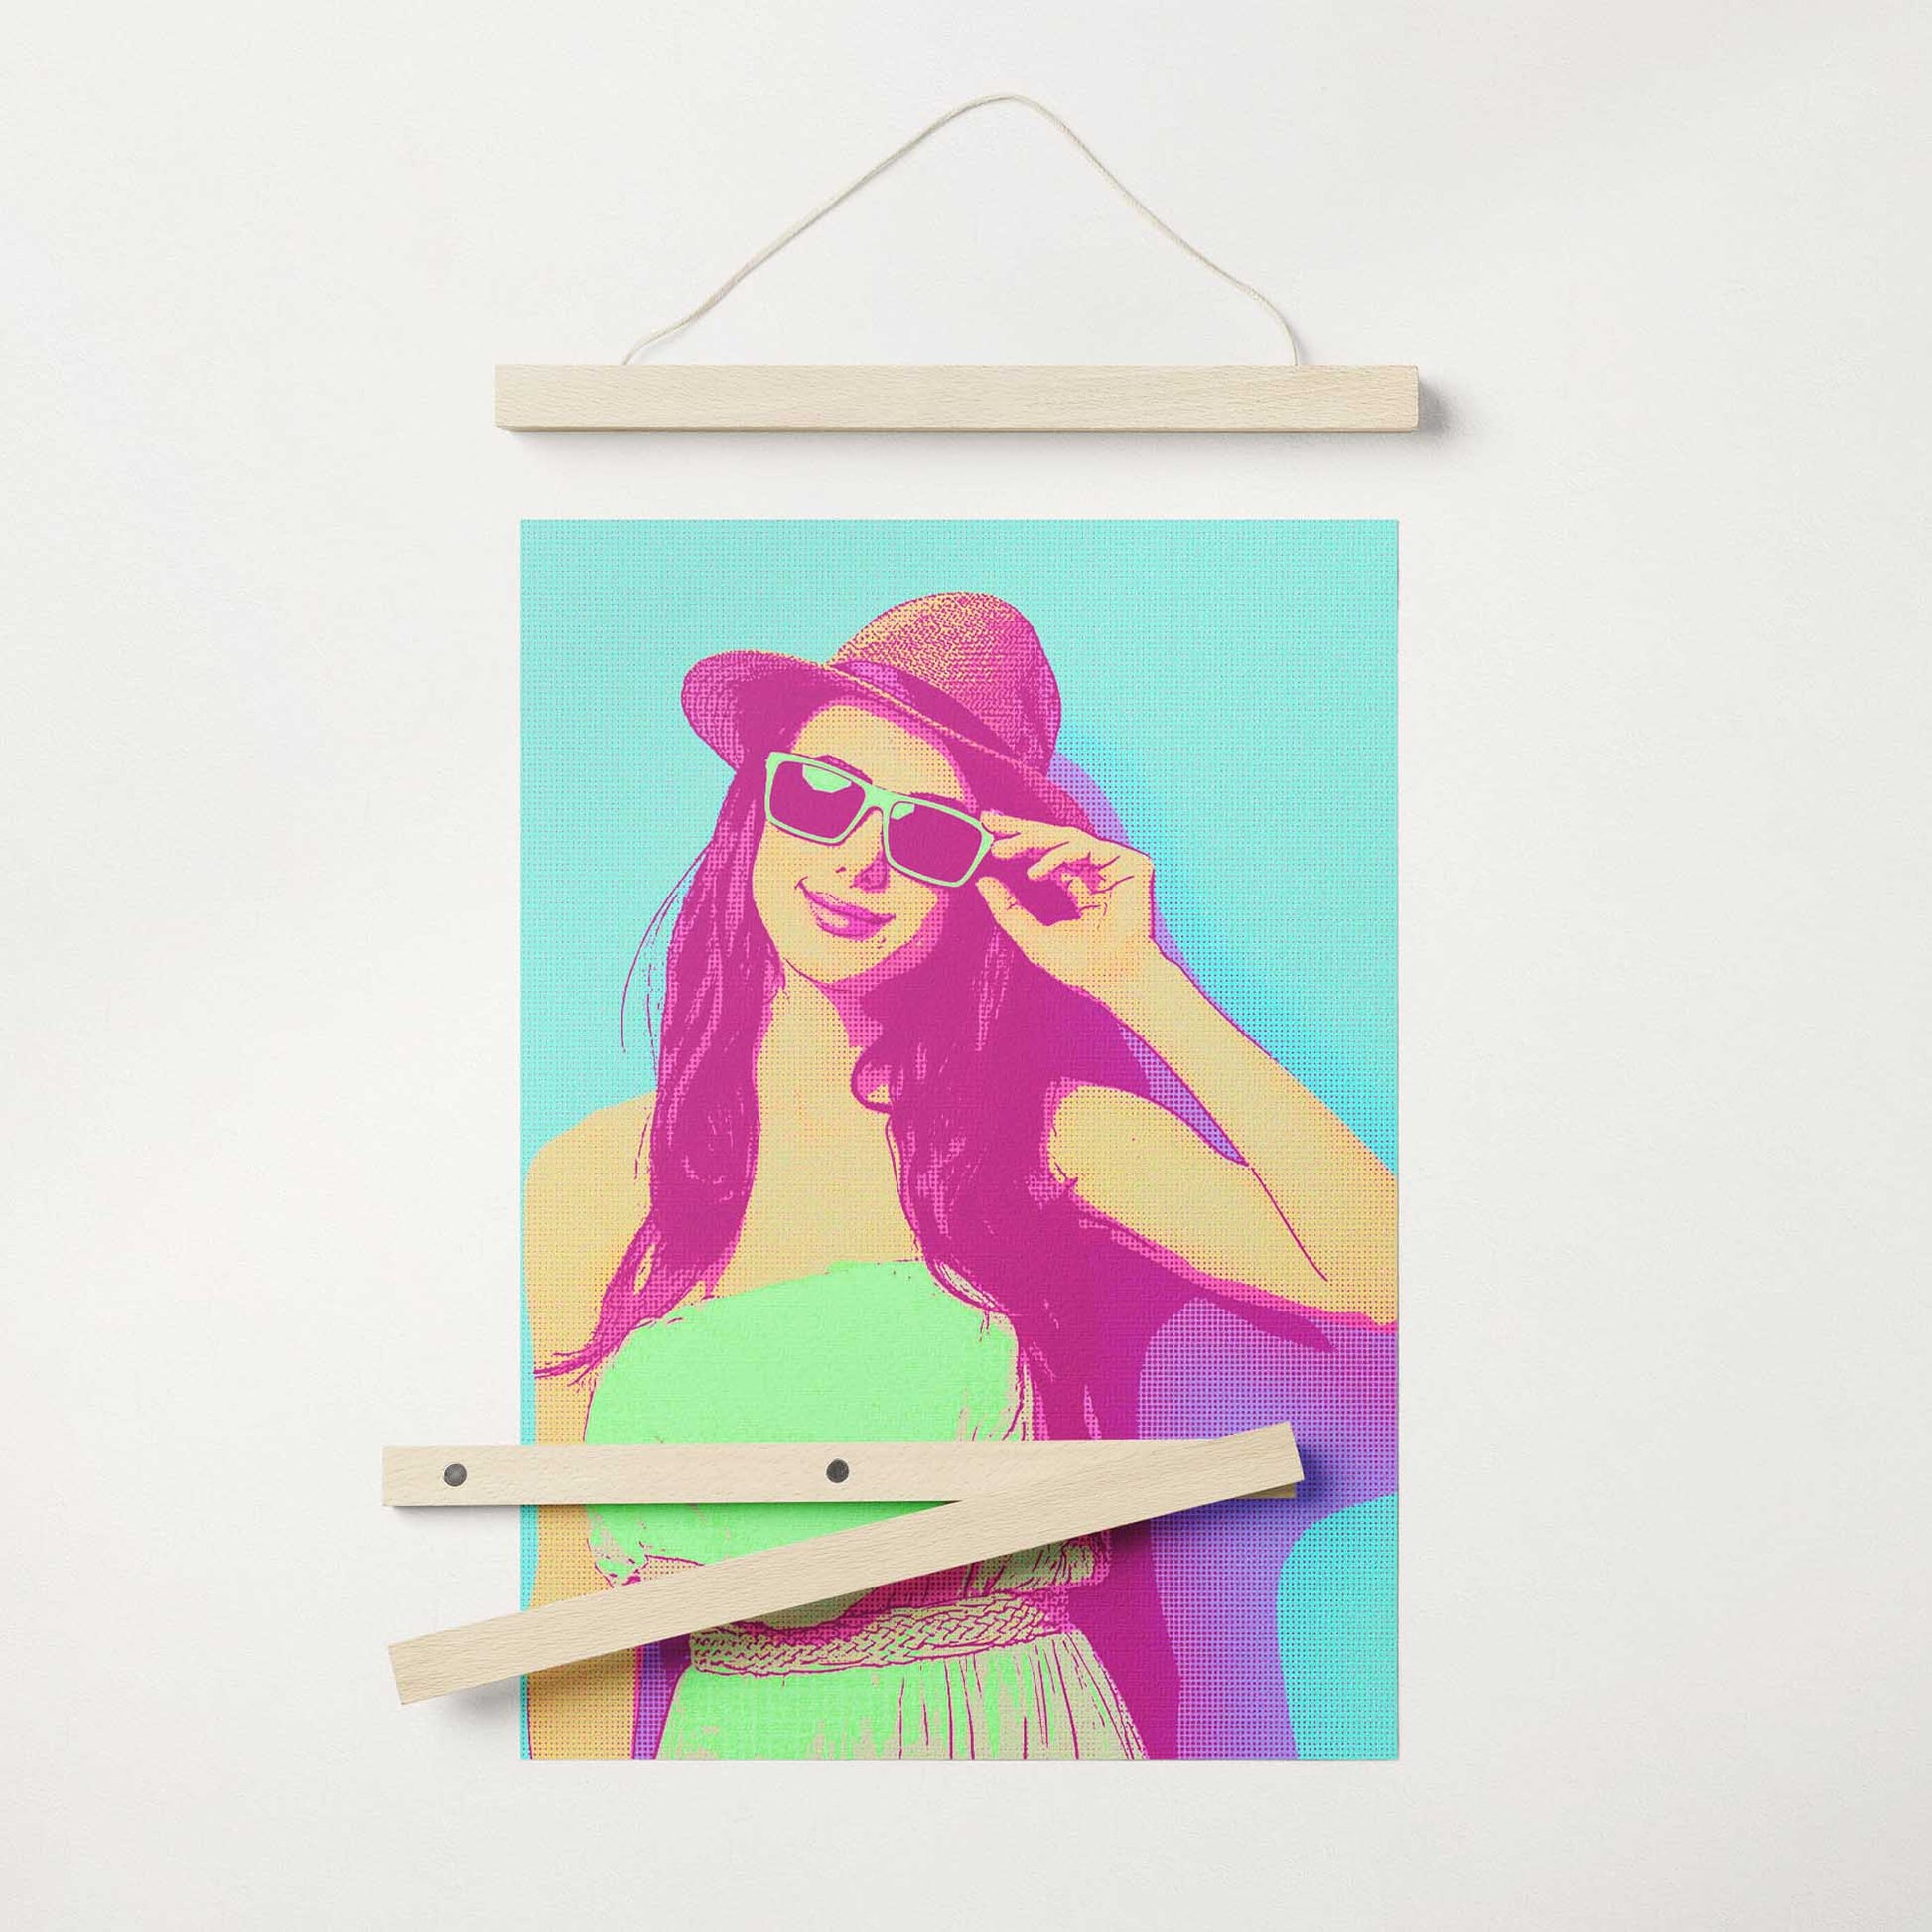 Personalise your space with the Personalised Green & Pink Pop Art Poster Hanger. Turn your photo into a retro-inspired cartoon with a halftone texture, capturing a cool and vibrant energy. The bold colors of green, pink, blue, and purple 